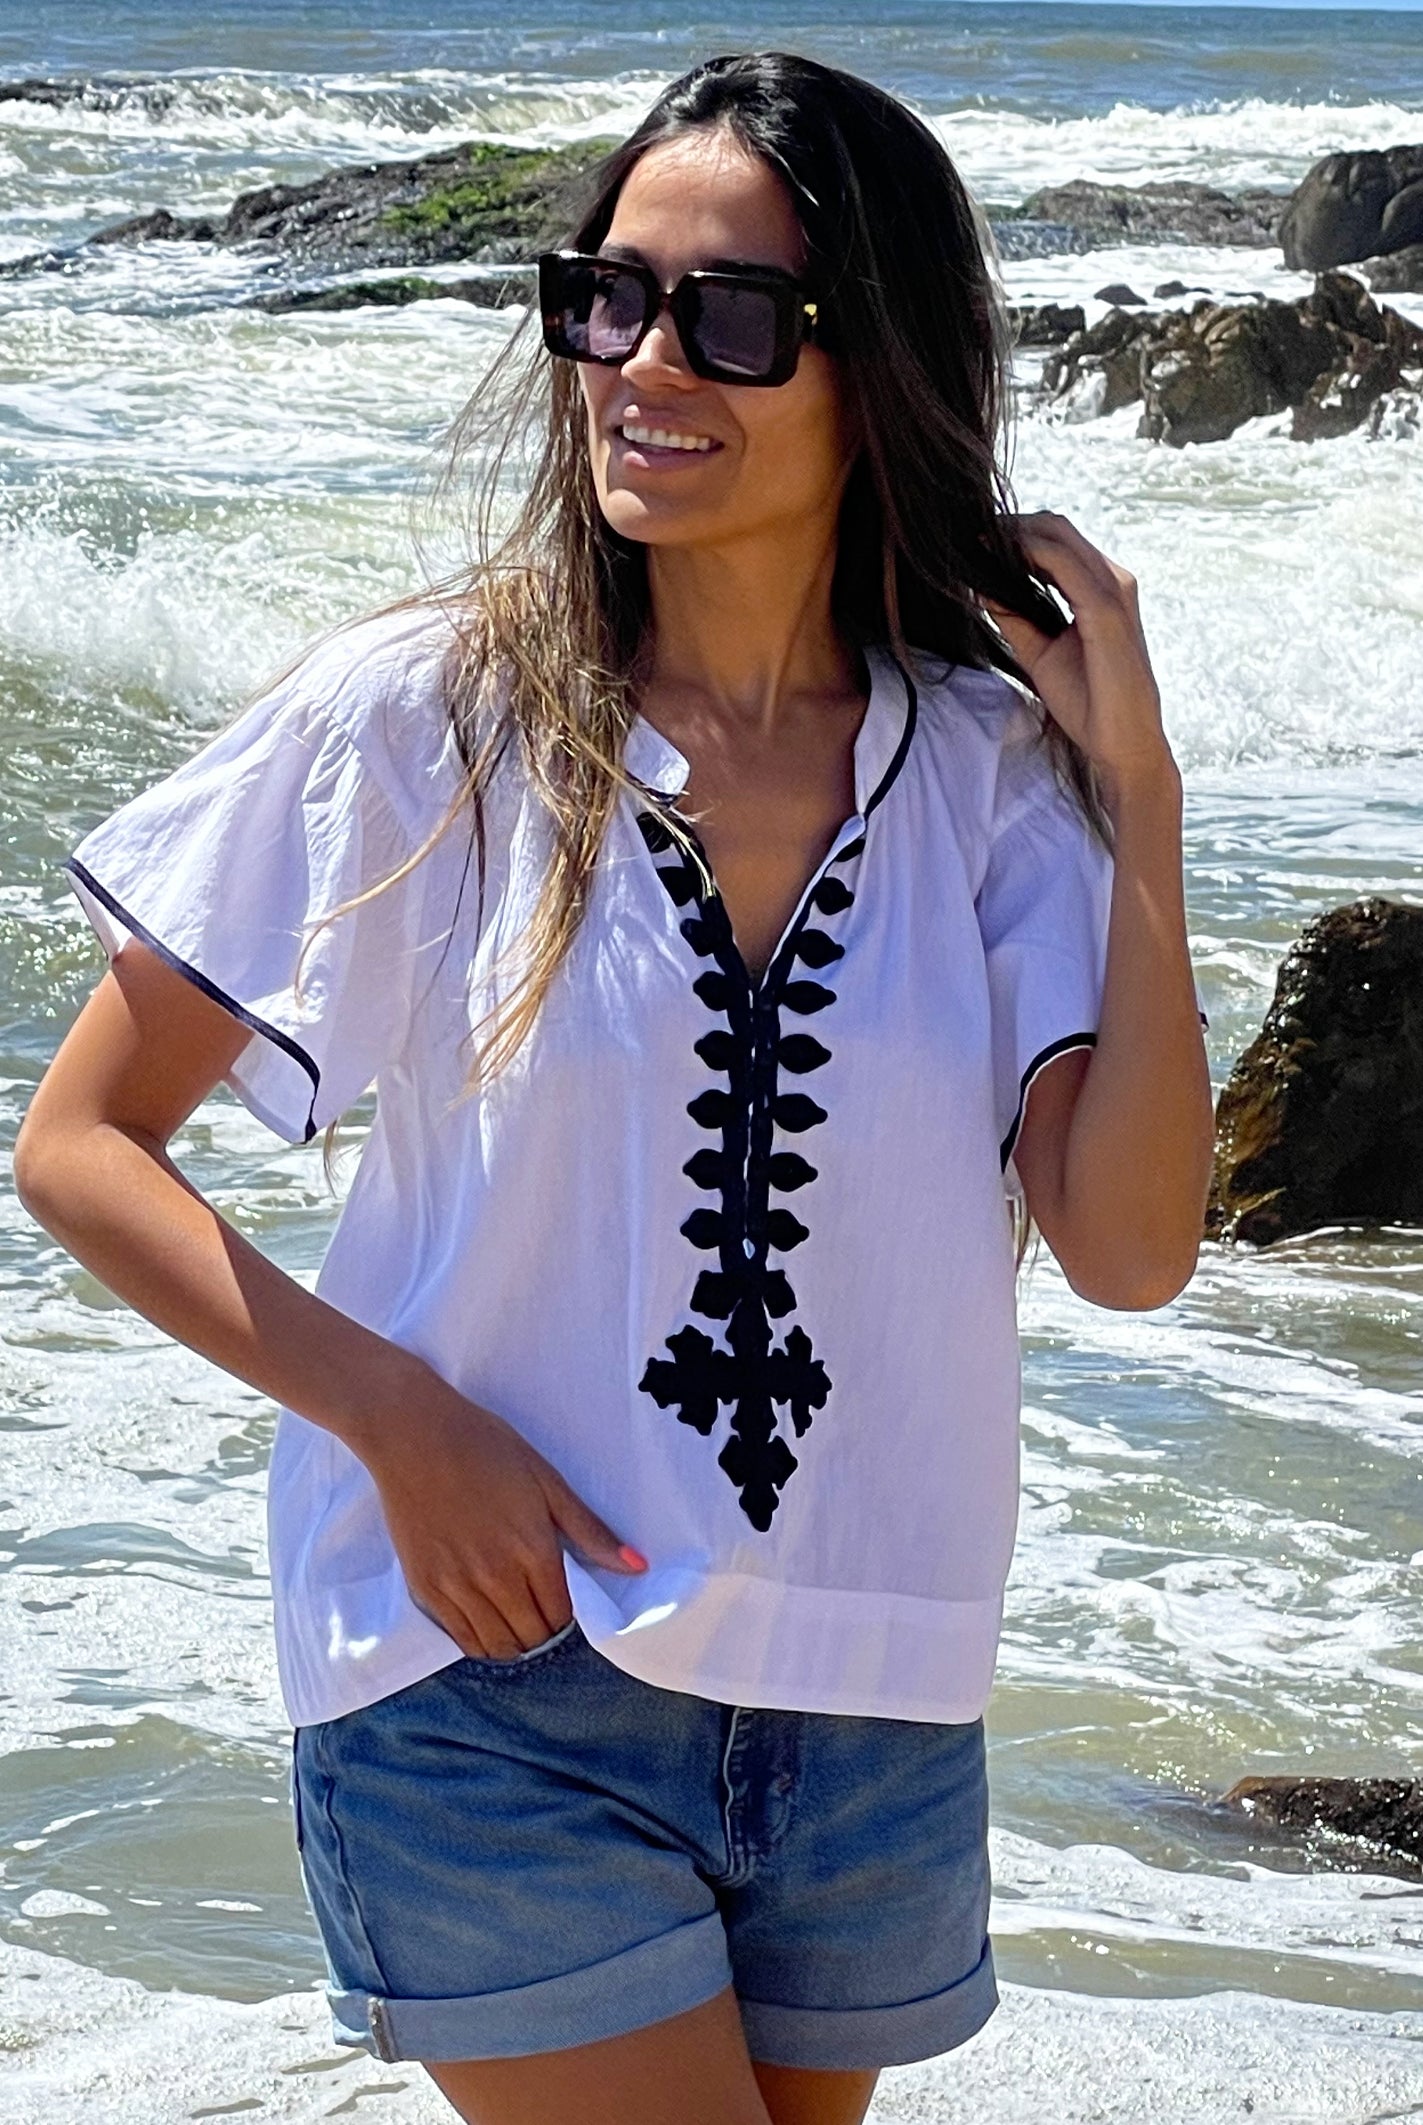  A model stood in front of the sea wearing a Rose and Rose white Imperia top, denim shorts and sunglasses.